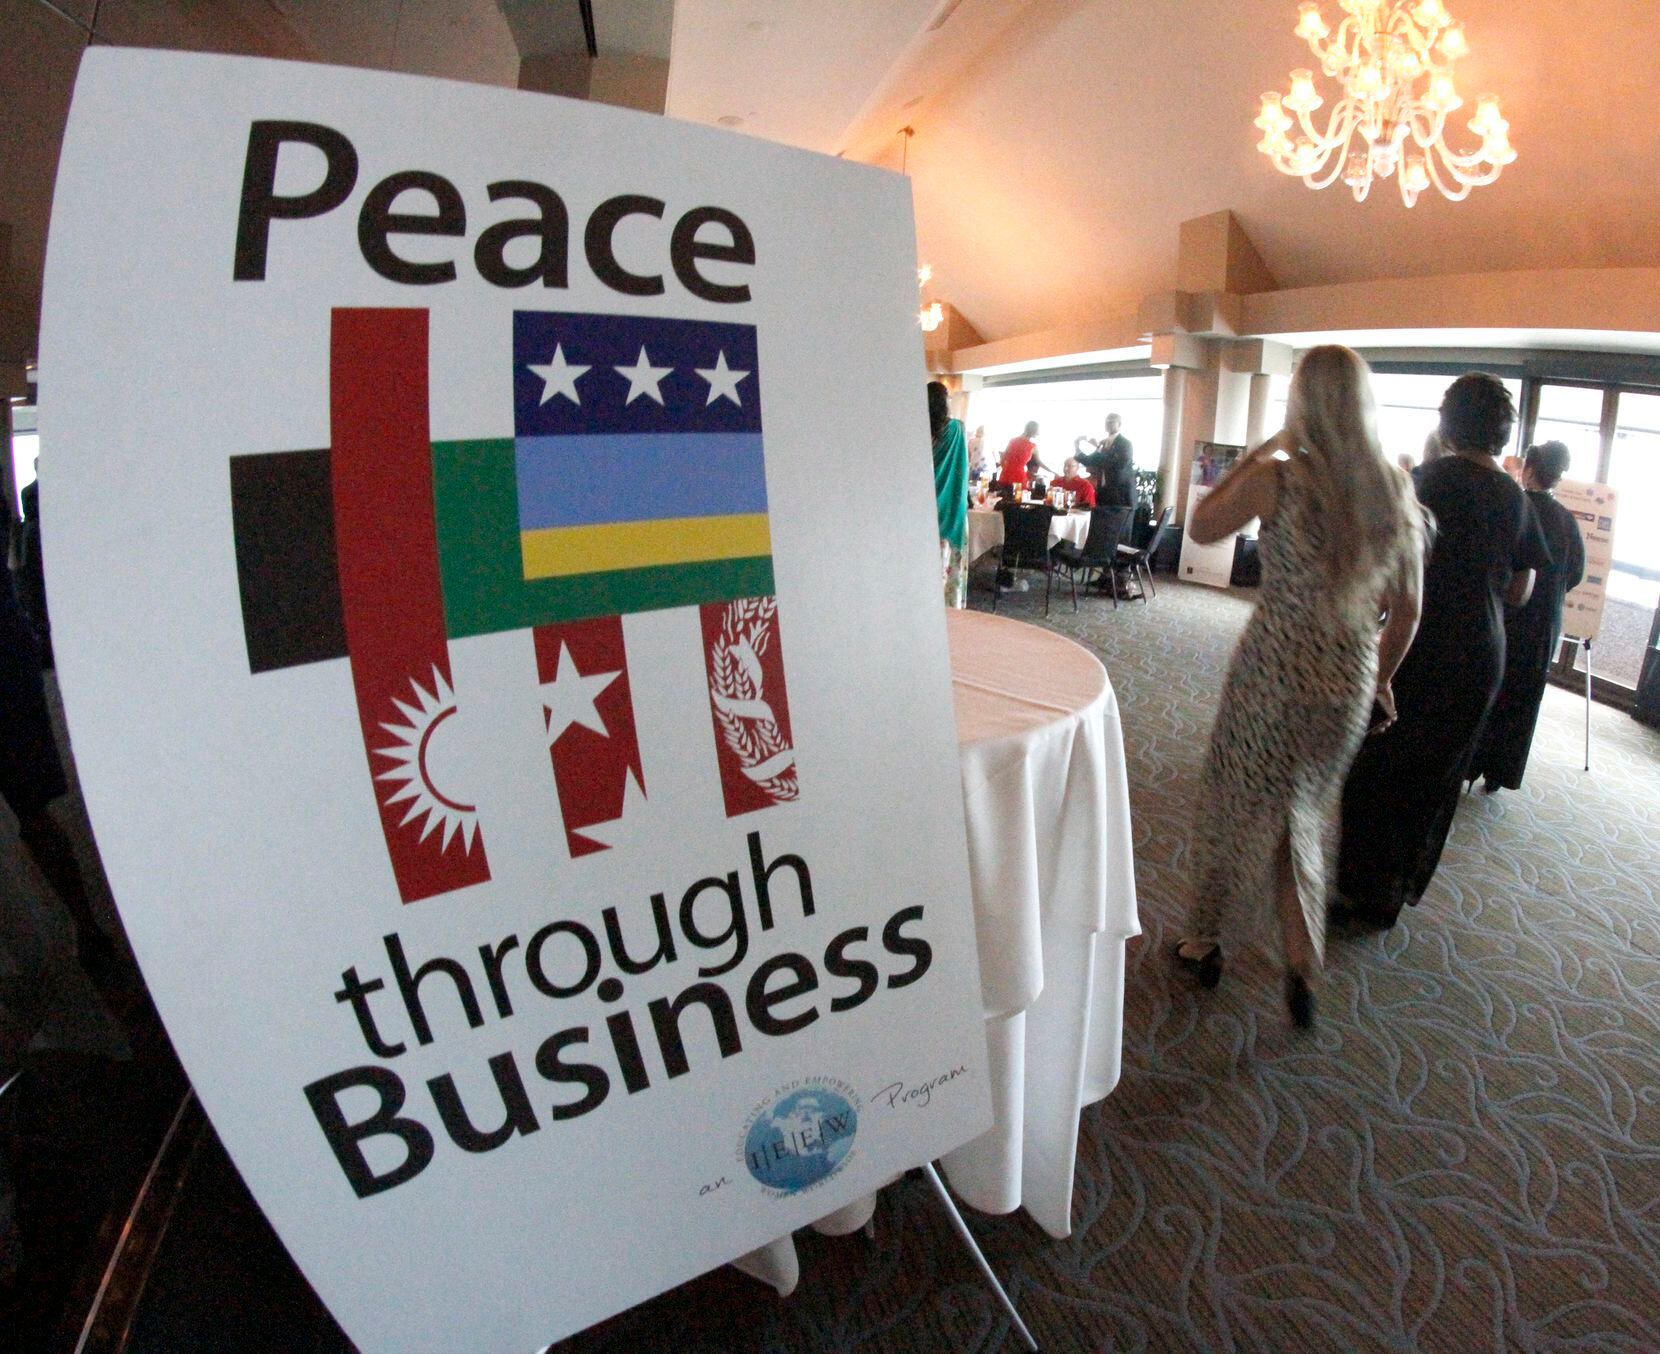 Honorees and their guests attended graduation ceremonies for attendees of the Peace Through Business entrepreneurial boot camp in Irving in 2018. 